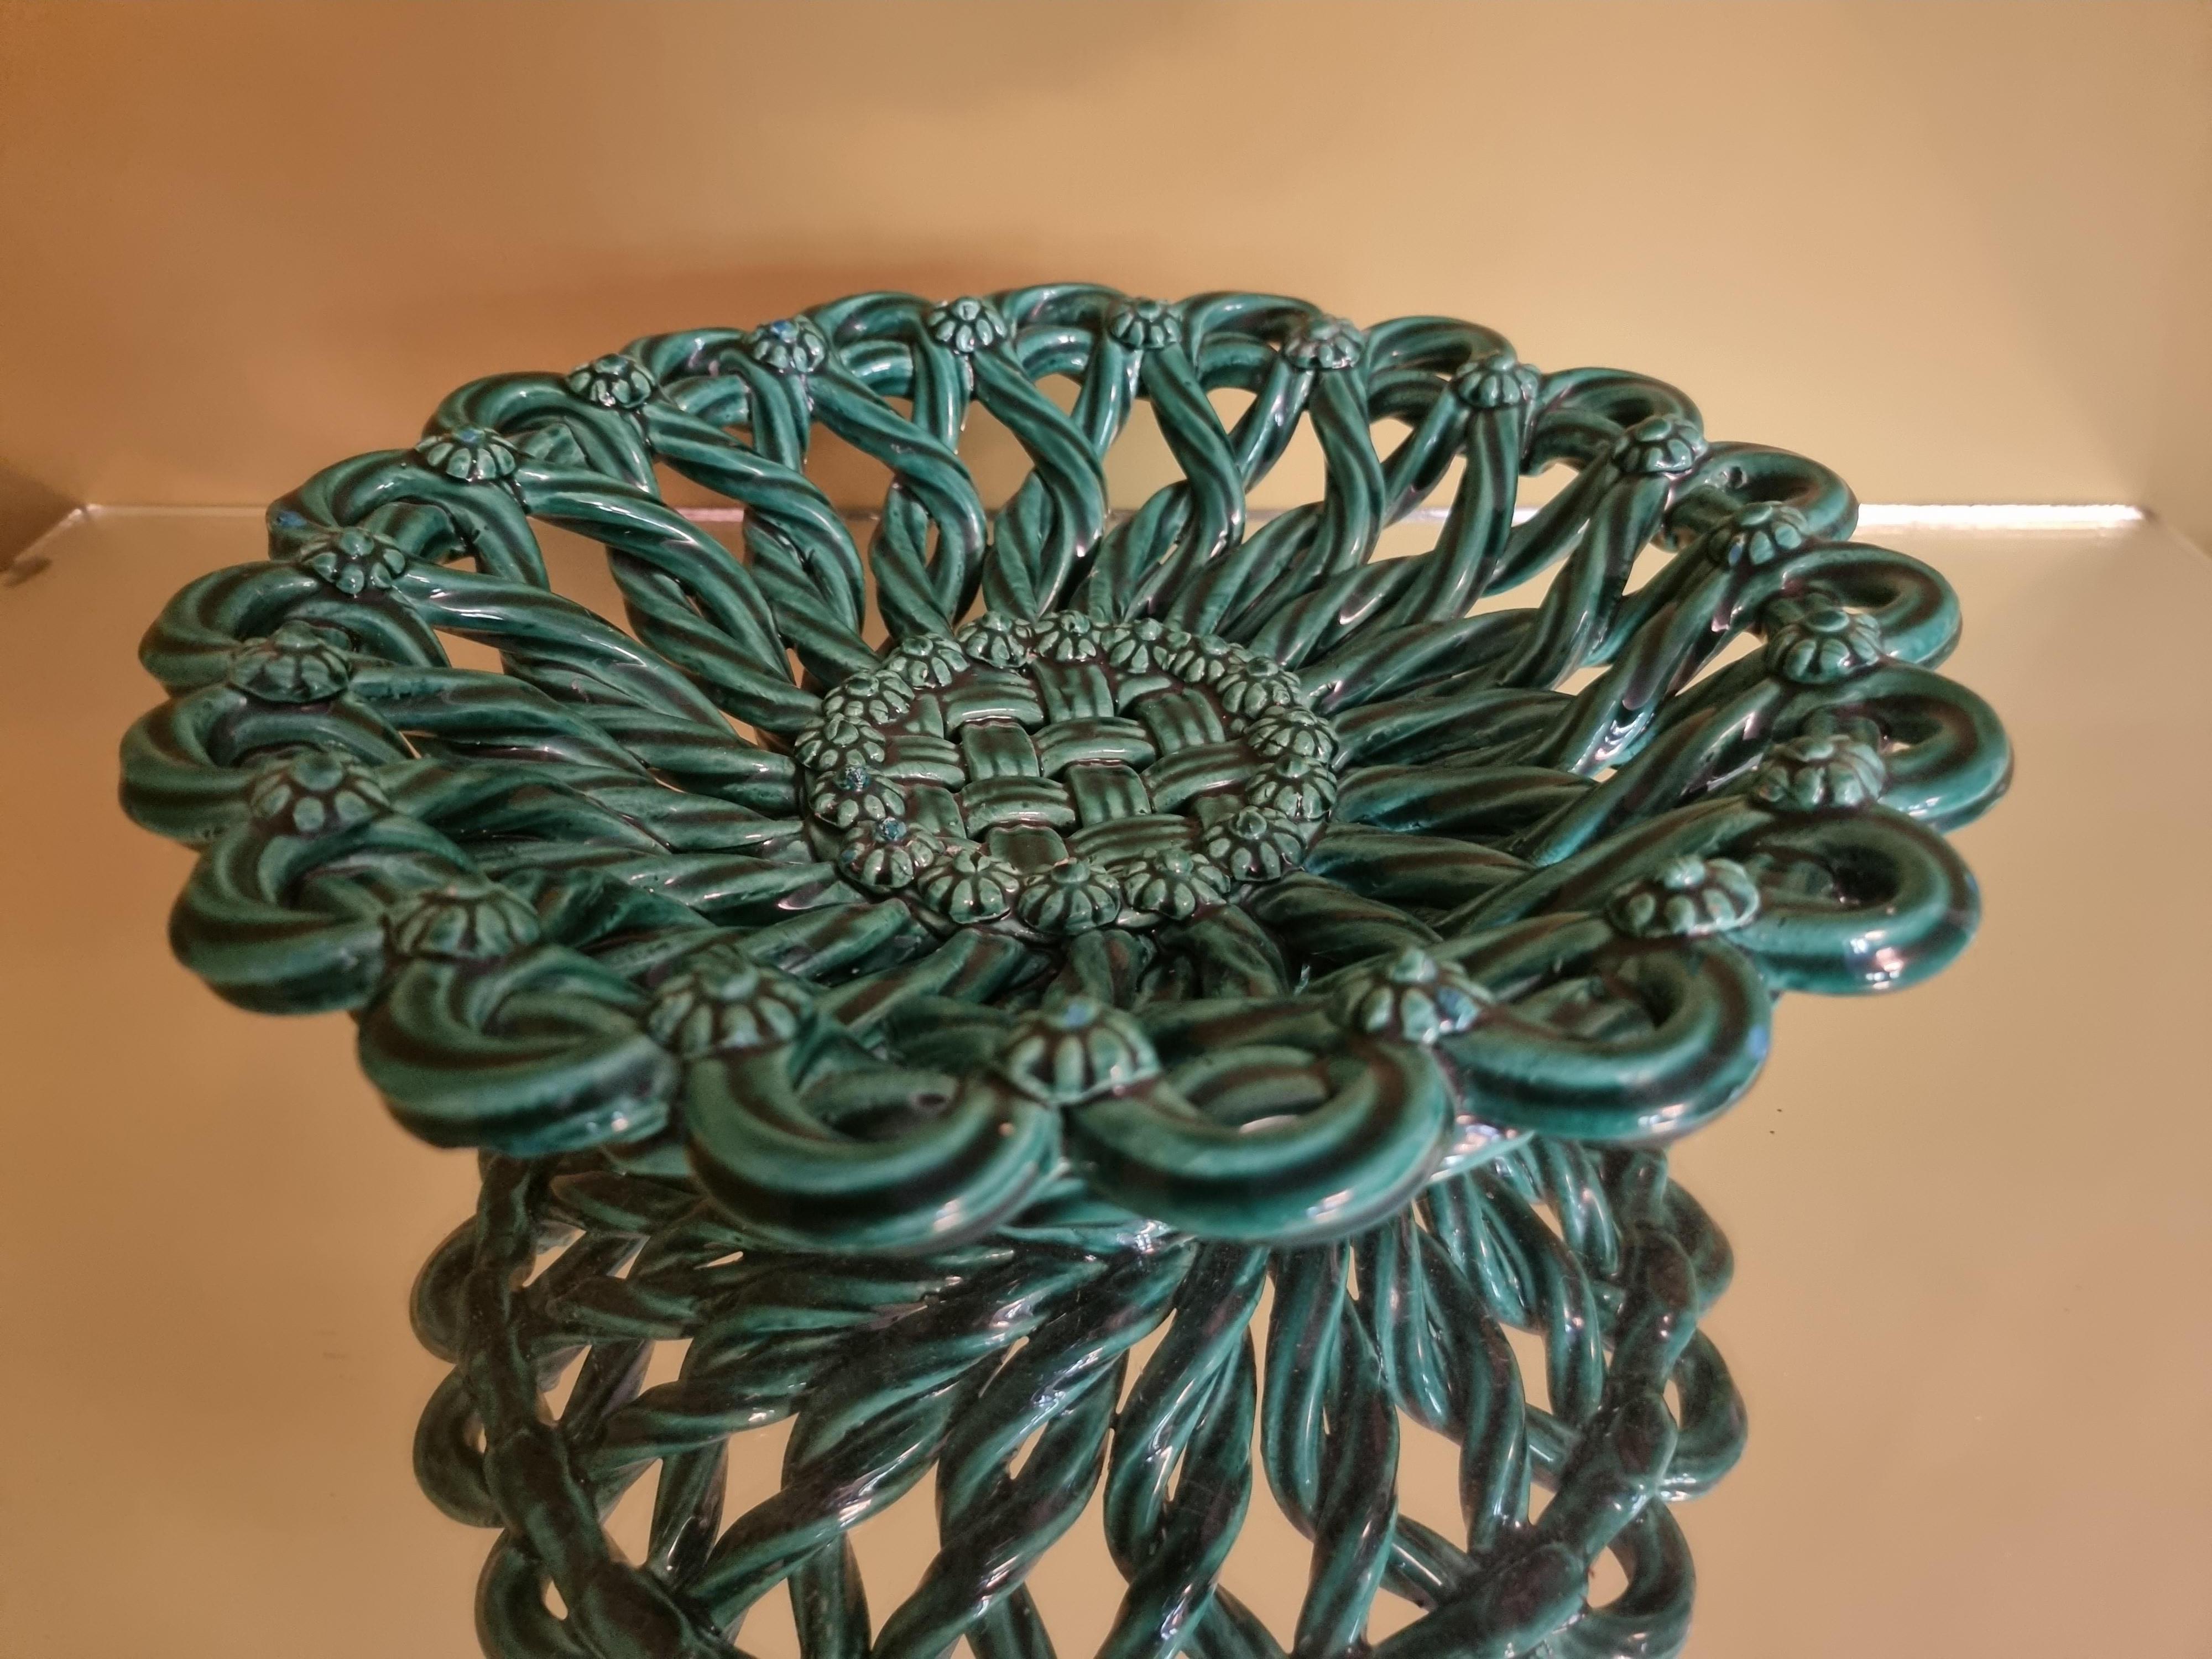 French Vintage Vallauris Woven Ceramic Basket in Green Glaze, France, 1940's